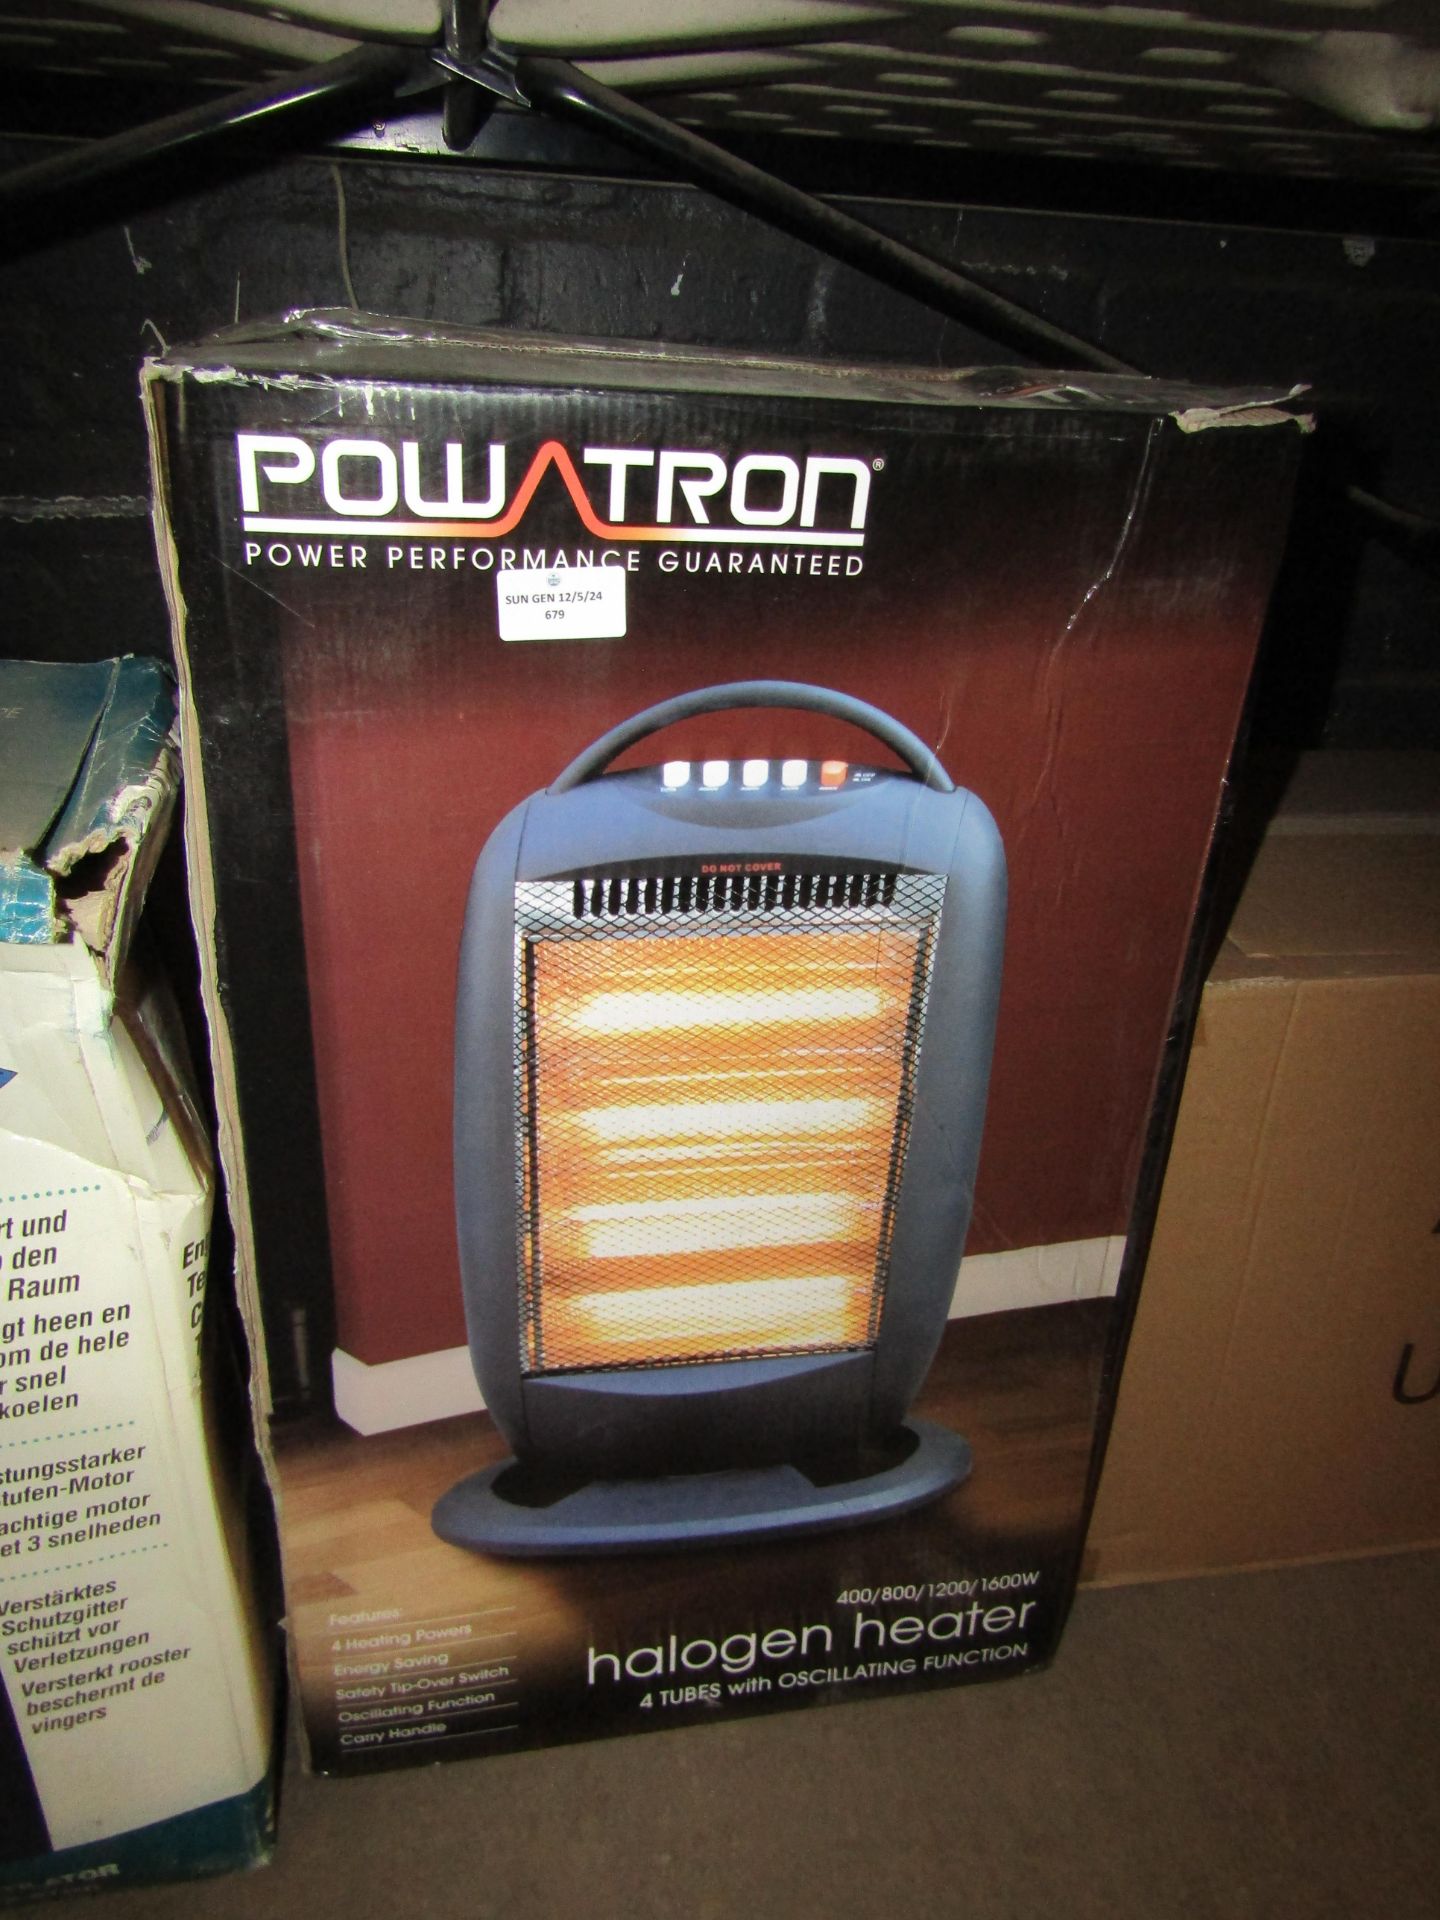 Powatron Halogen Heater 4 Tubes With Oscillating Function, Unchecked & Boxed.